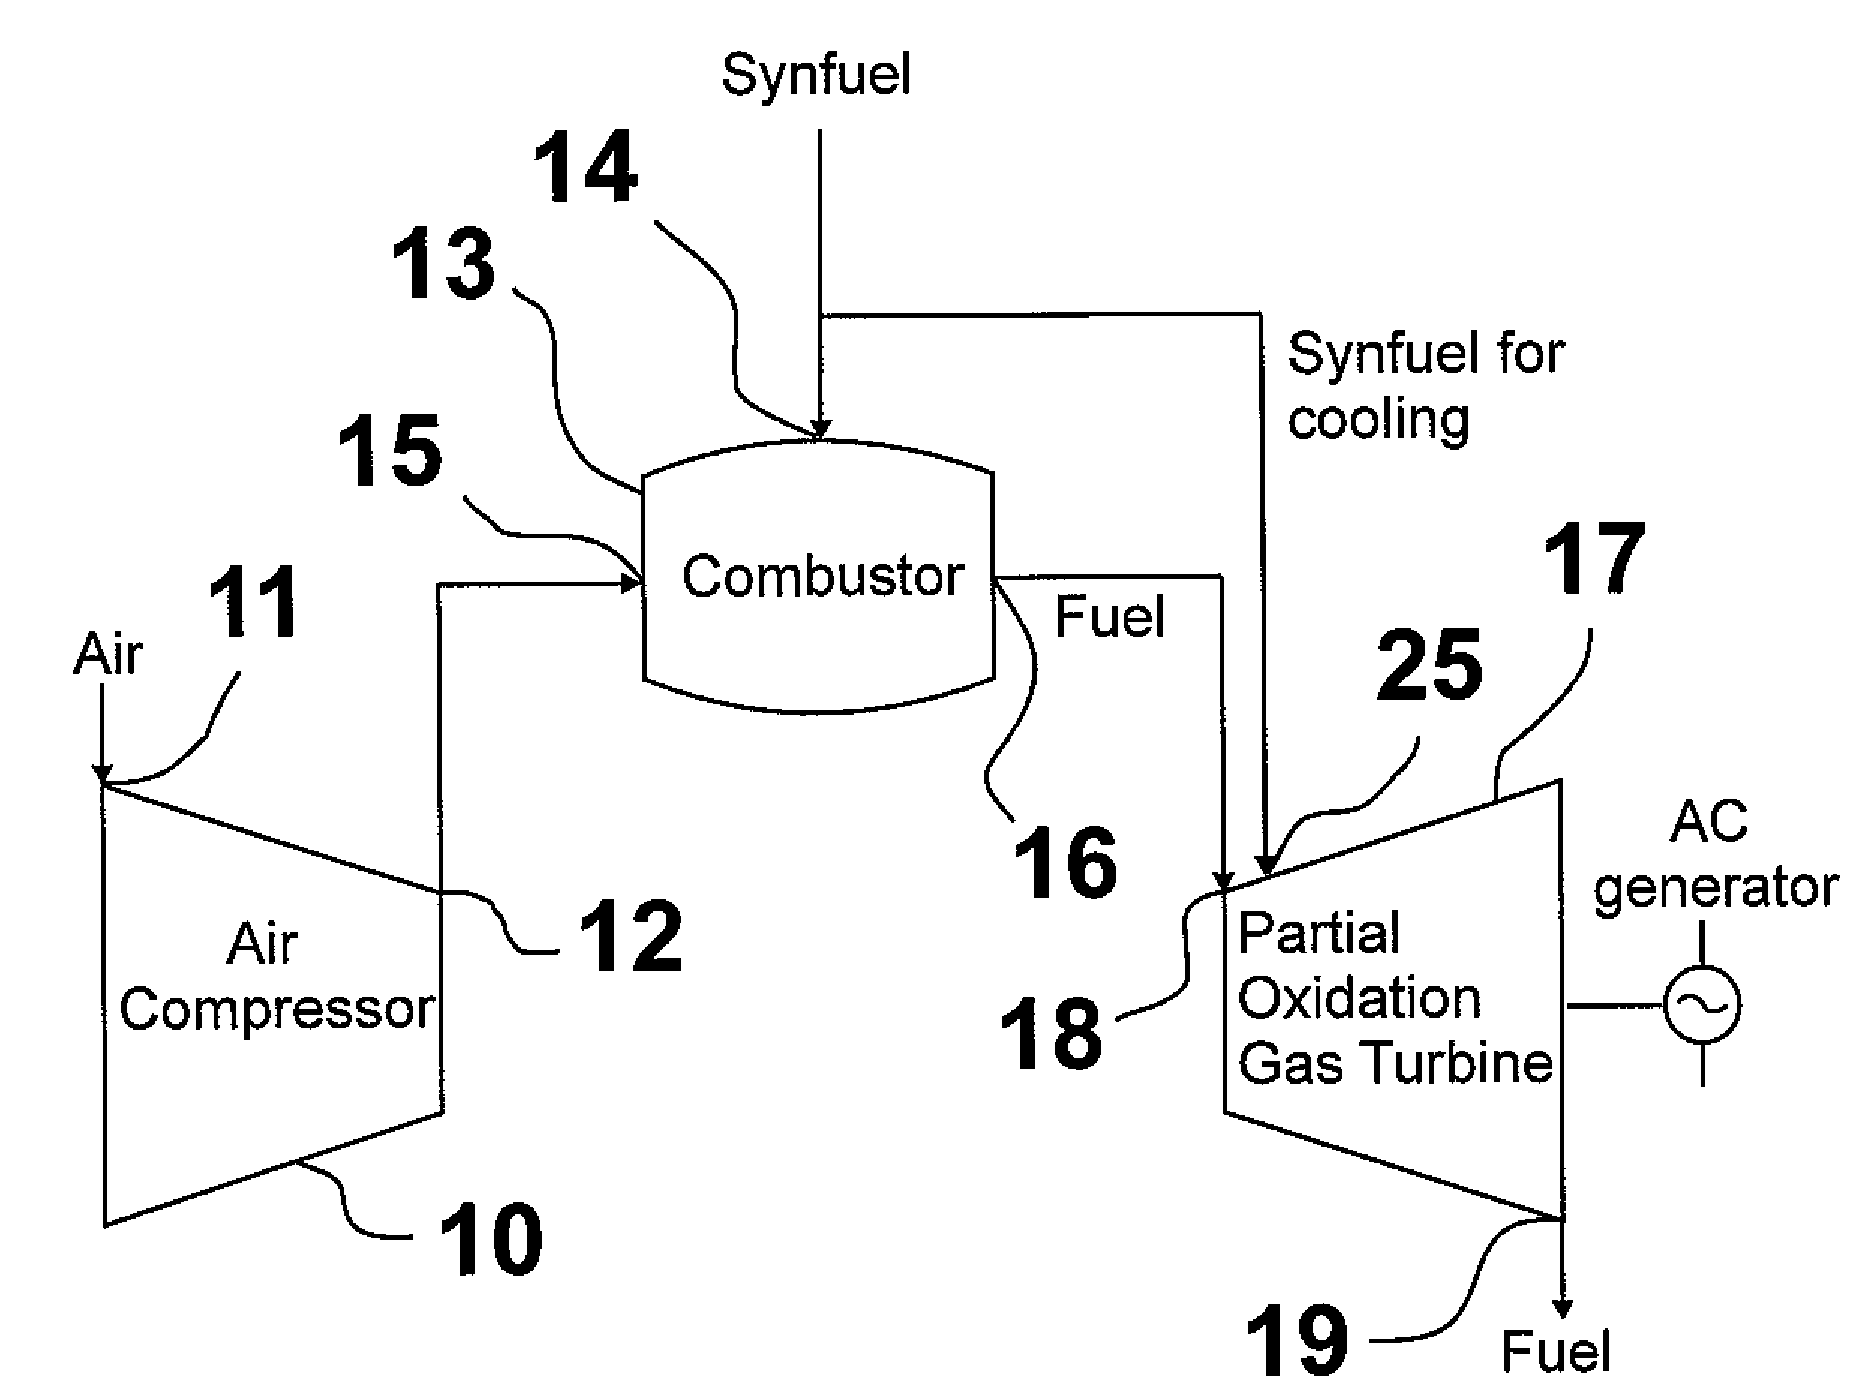 Partial oxidation gas turbine cooling